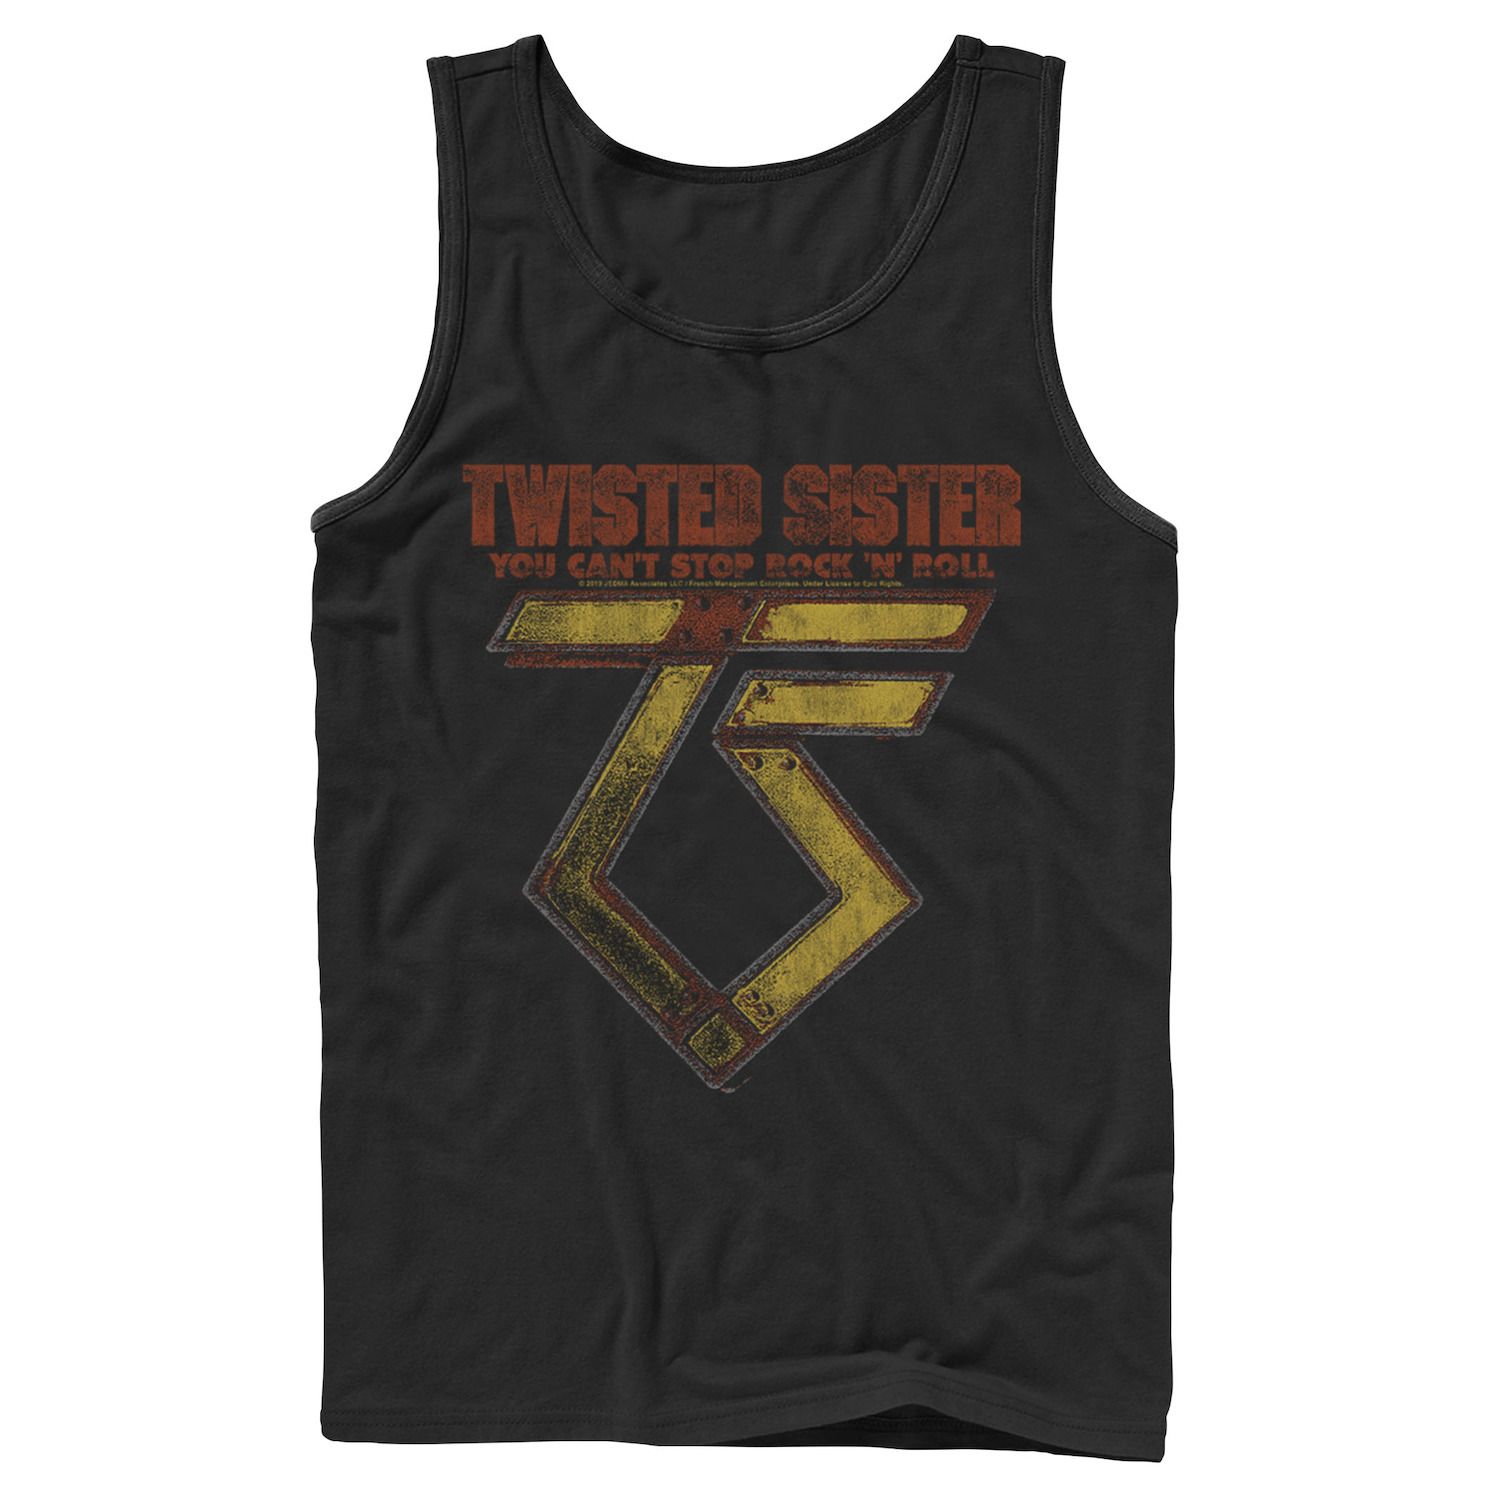 Мужская майка Twisted Sister You Can't Stop Rock N' Roll Licensed Character twisted sister you can t stop rock